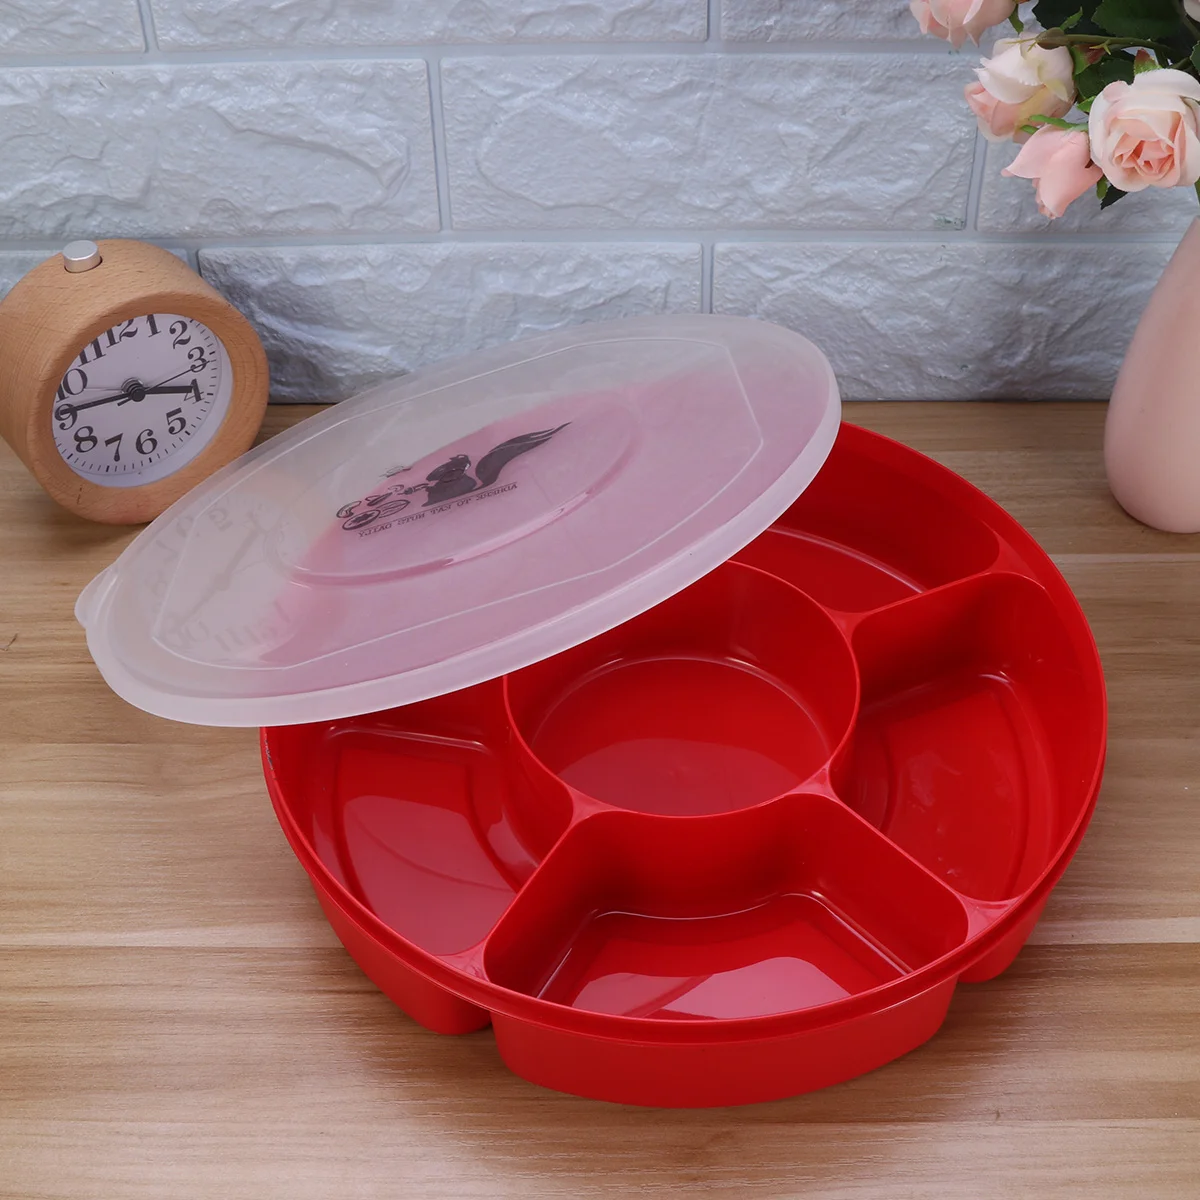 

Tray Serving Snack Fruit Candy Divided Box Platelid Platter Dish Appetizer Storage Driedplates Nutcompartment Container Snacks